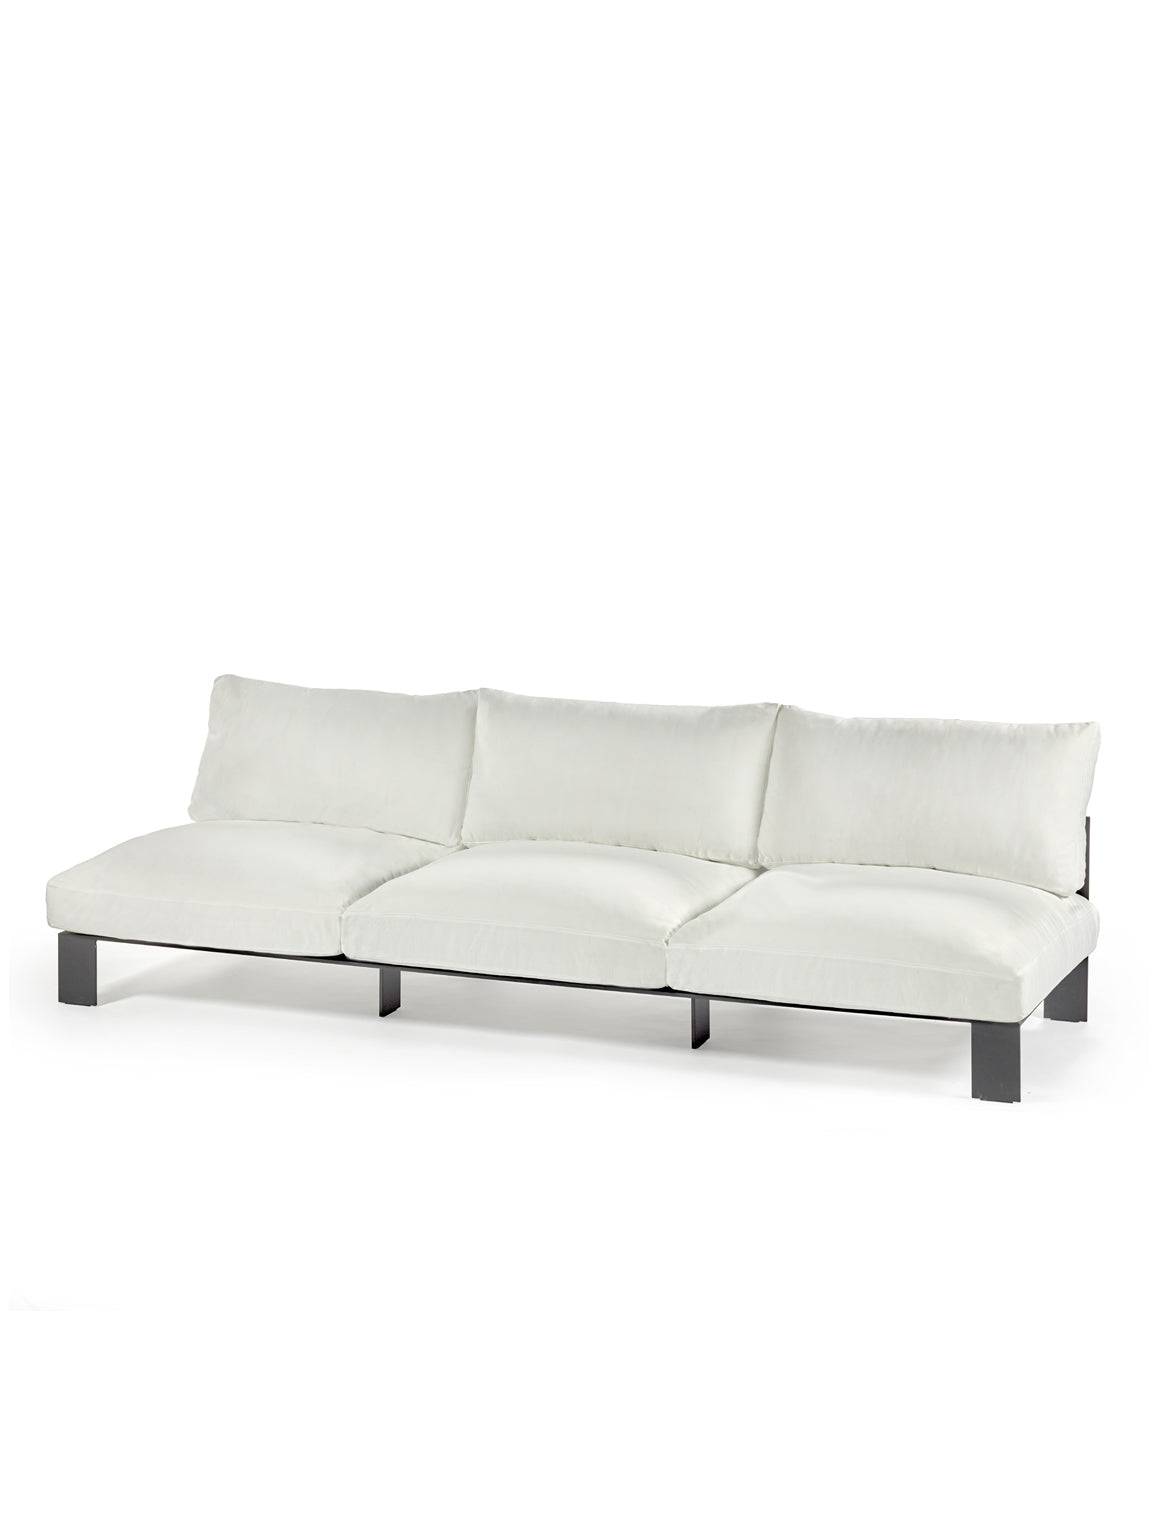 Mombaers Outdoor Sofa - Snow White - THAT COOL LIVING